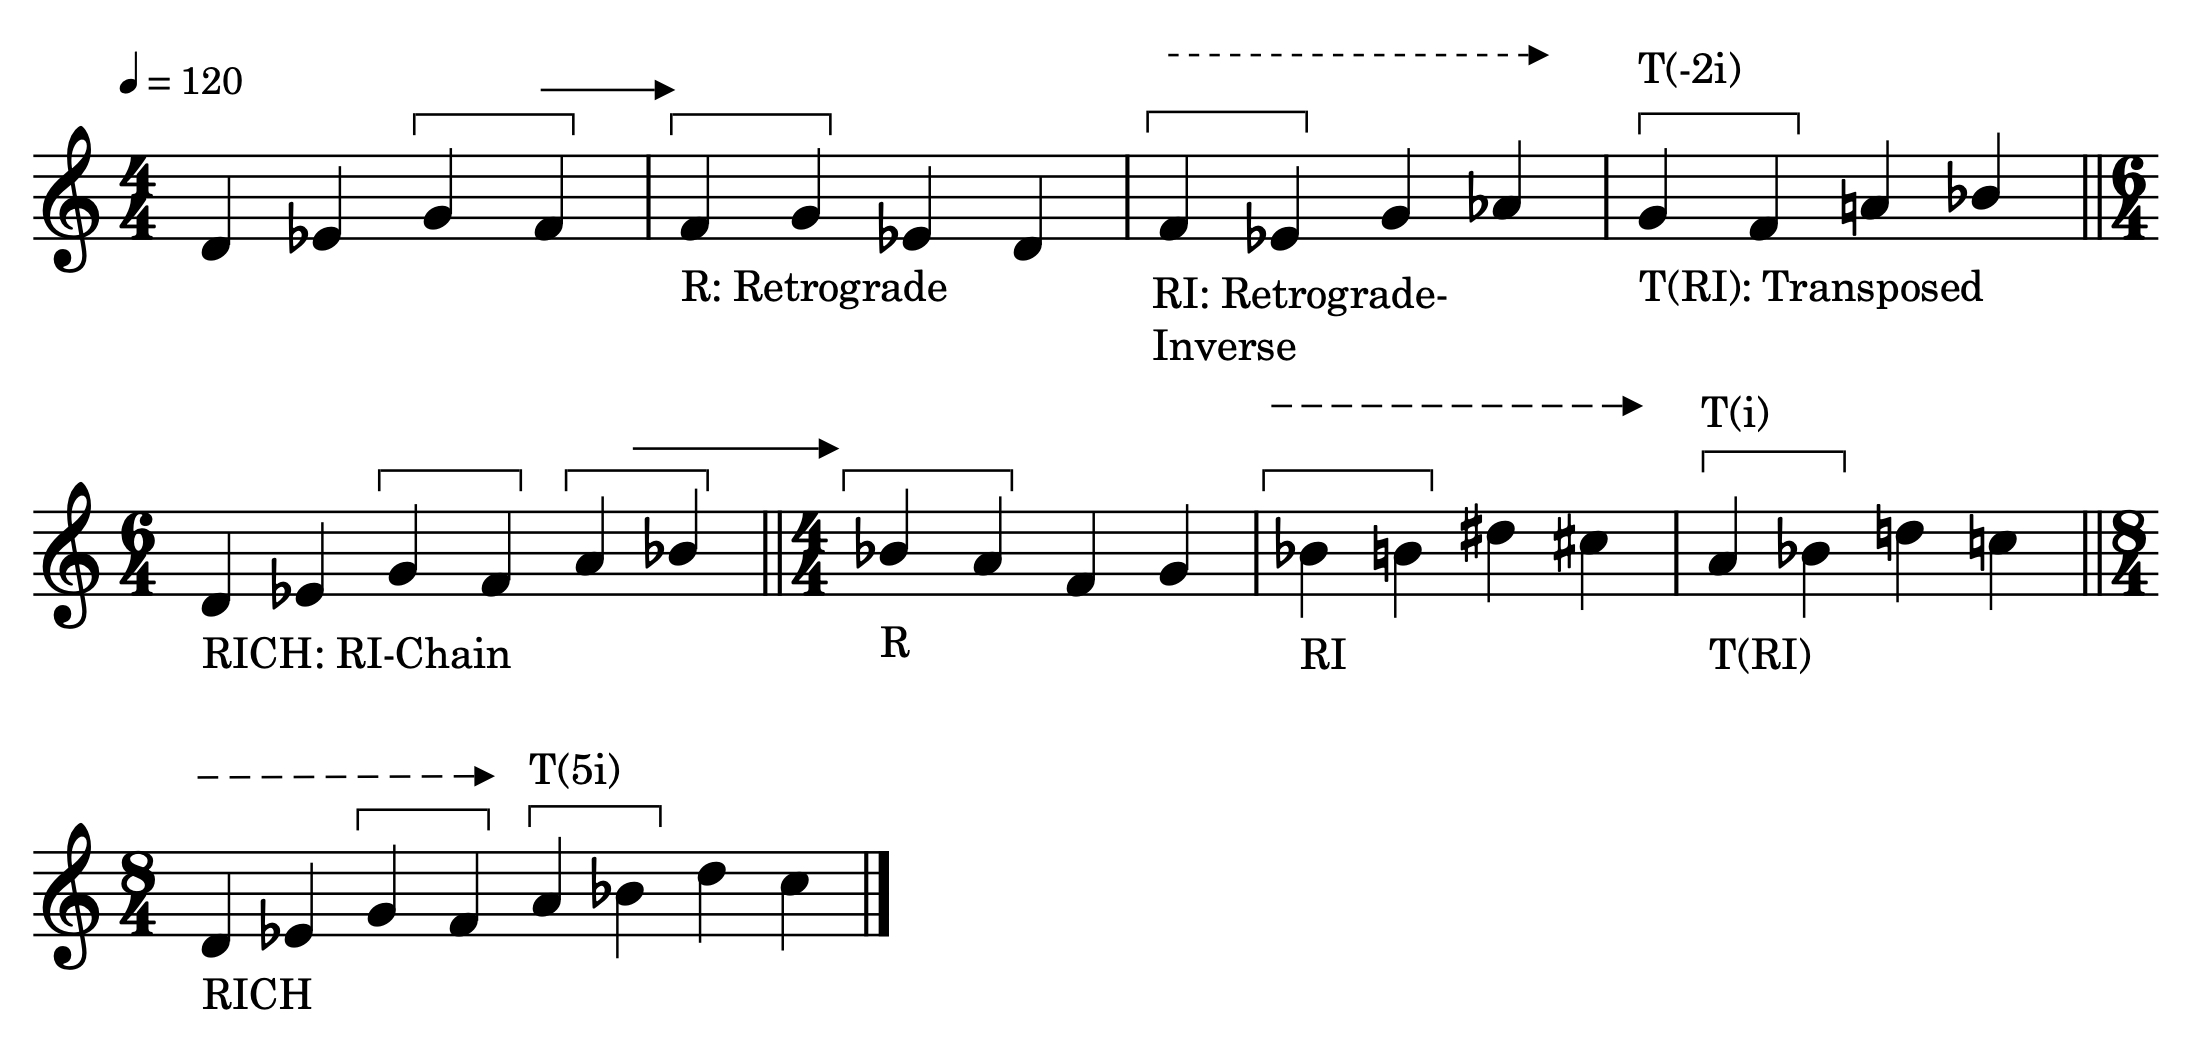 Retrograde-Inversion Chain example in staff notation